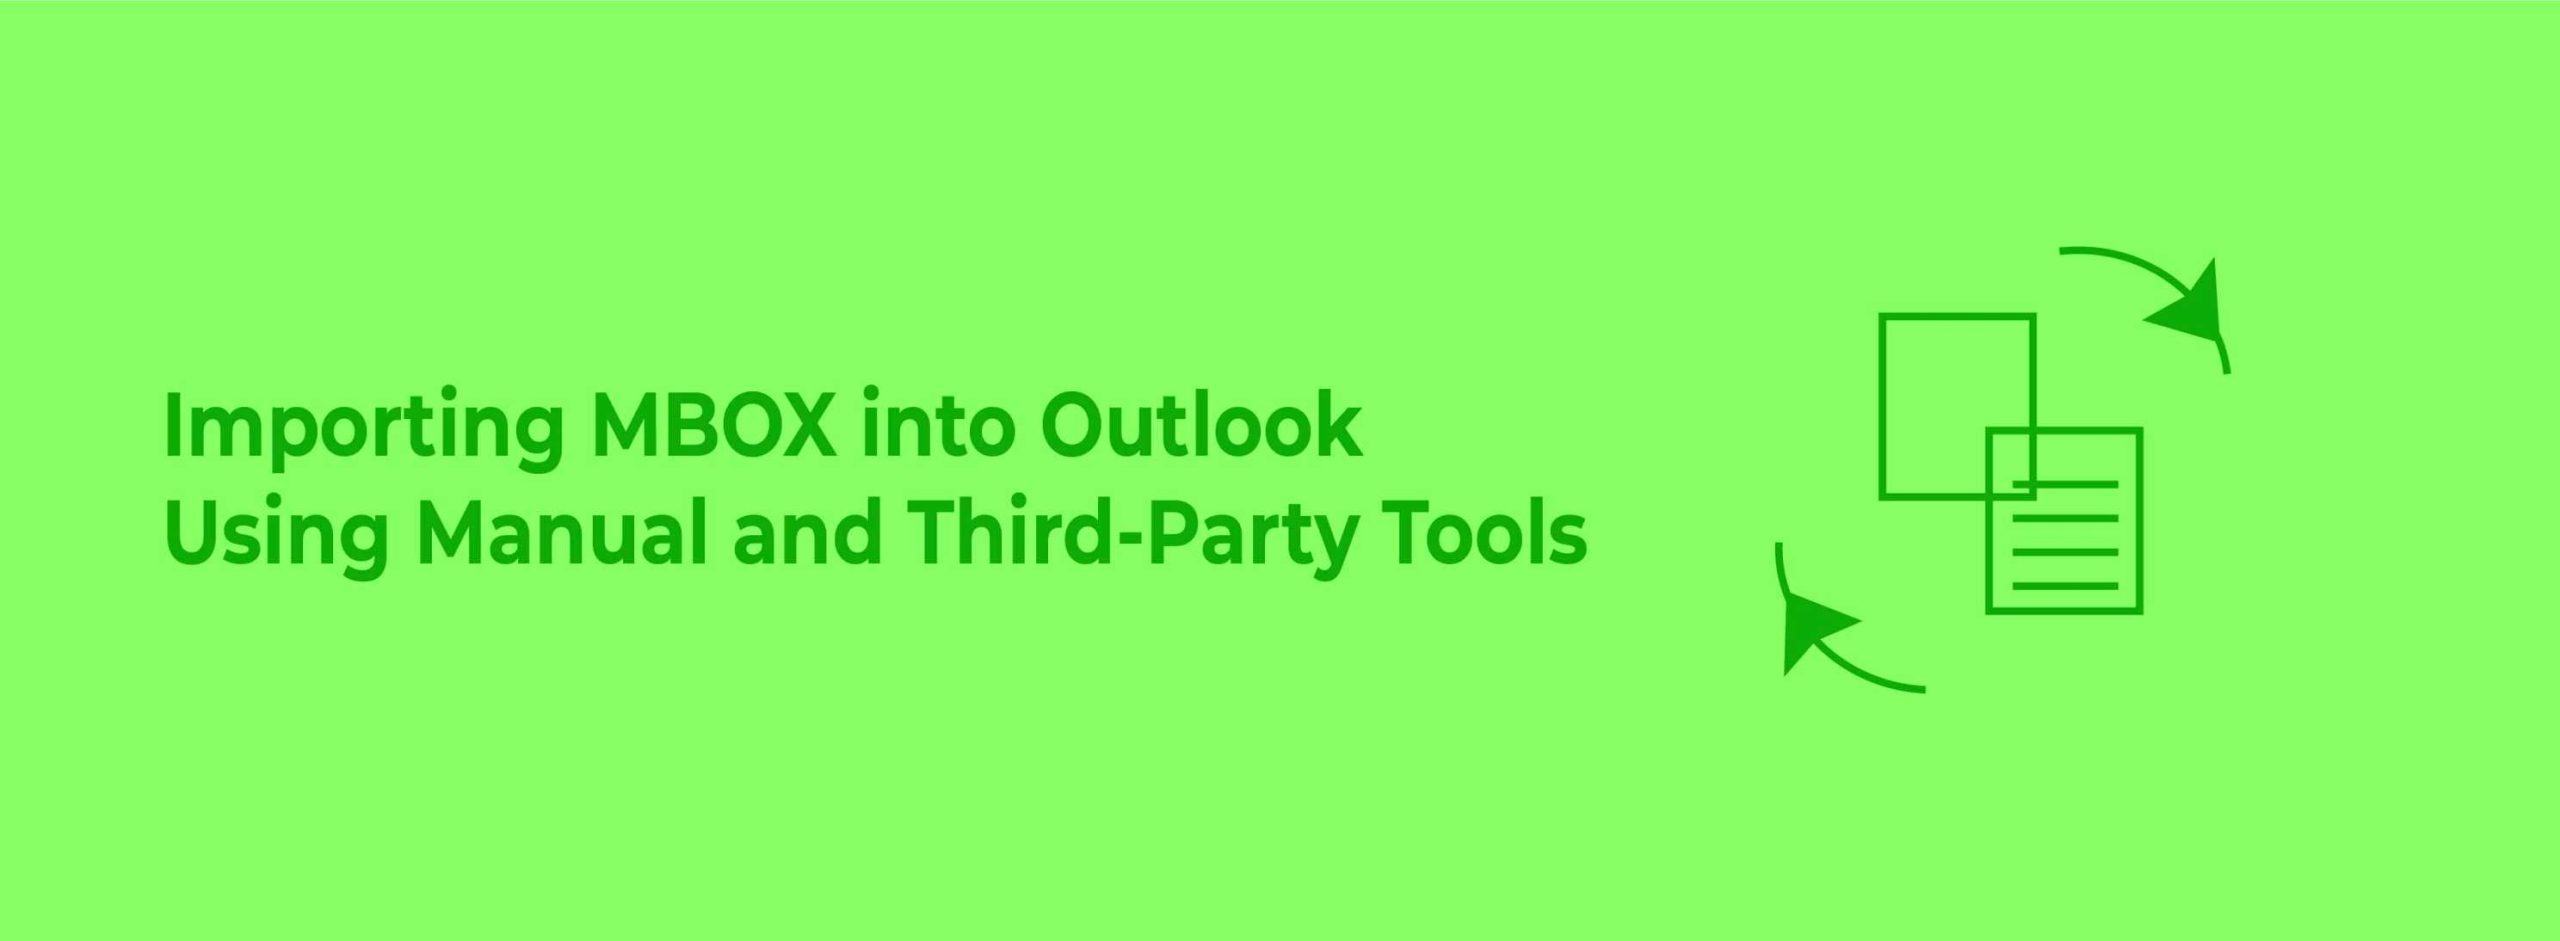 Importing MBOX into Outlook Using Manual and Third-Party Tools - Wiz Article